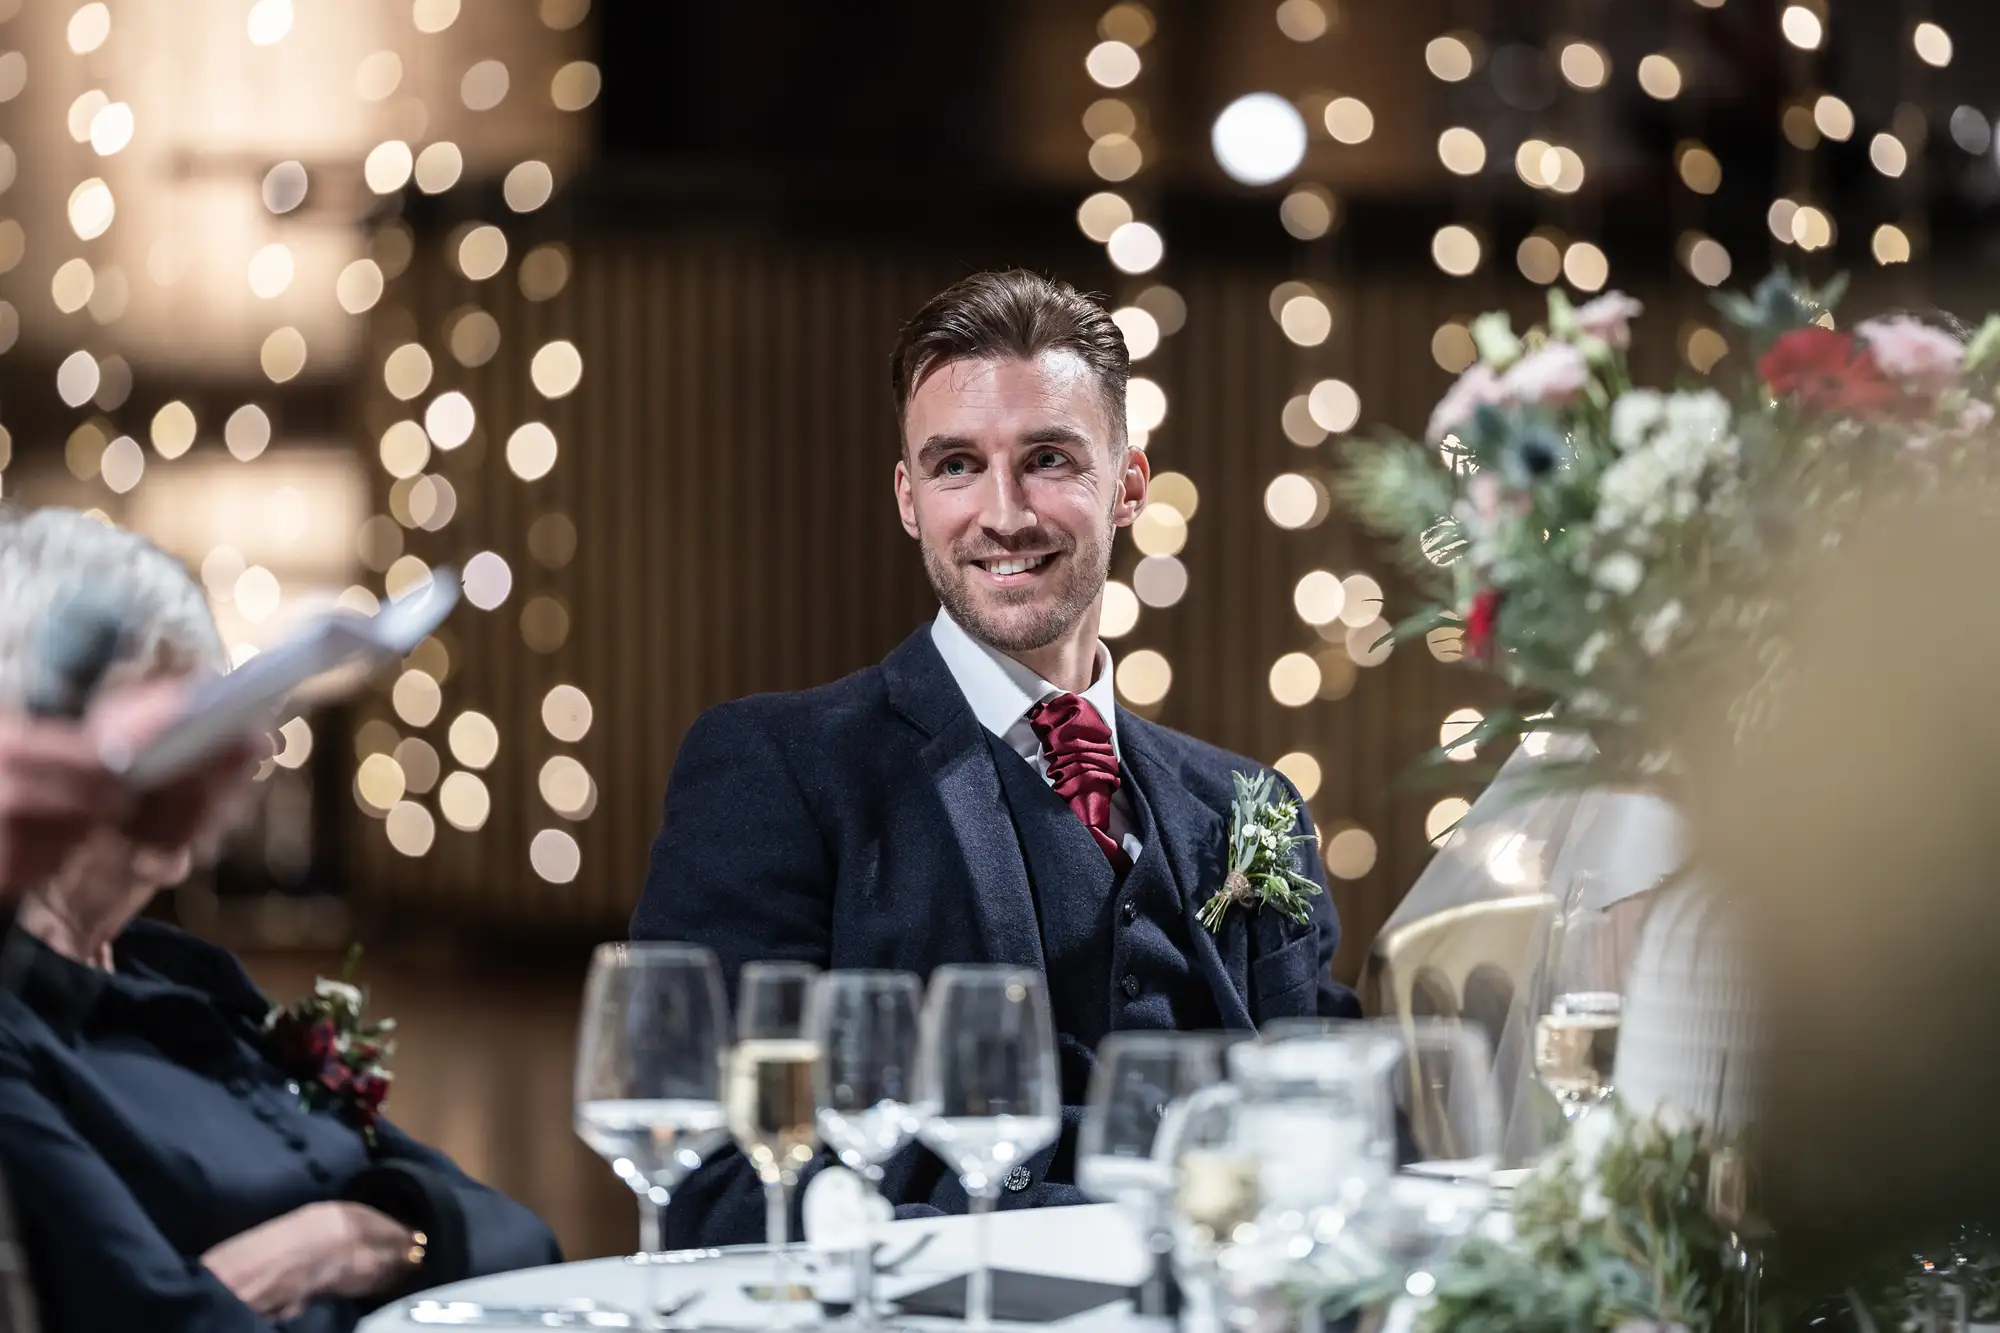 Man in a suit with a red tie and boutonniere smiling at a wedding reception, surrounded by guests and twinkling lights in the background.